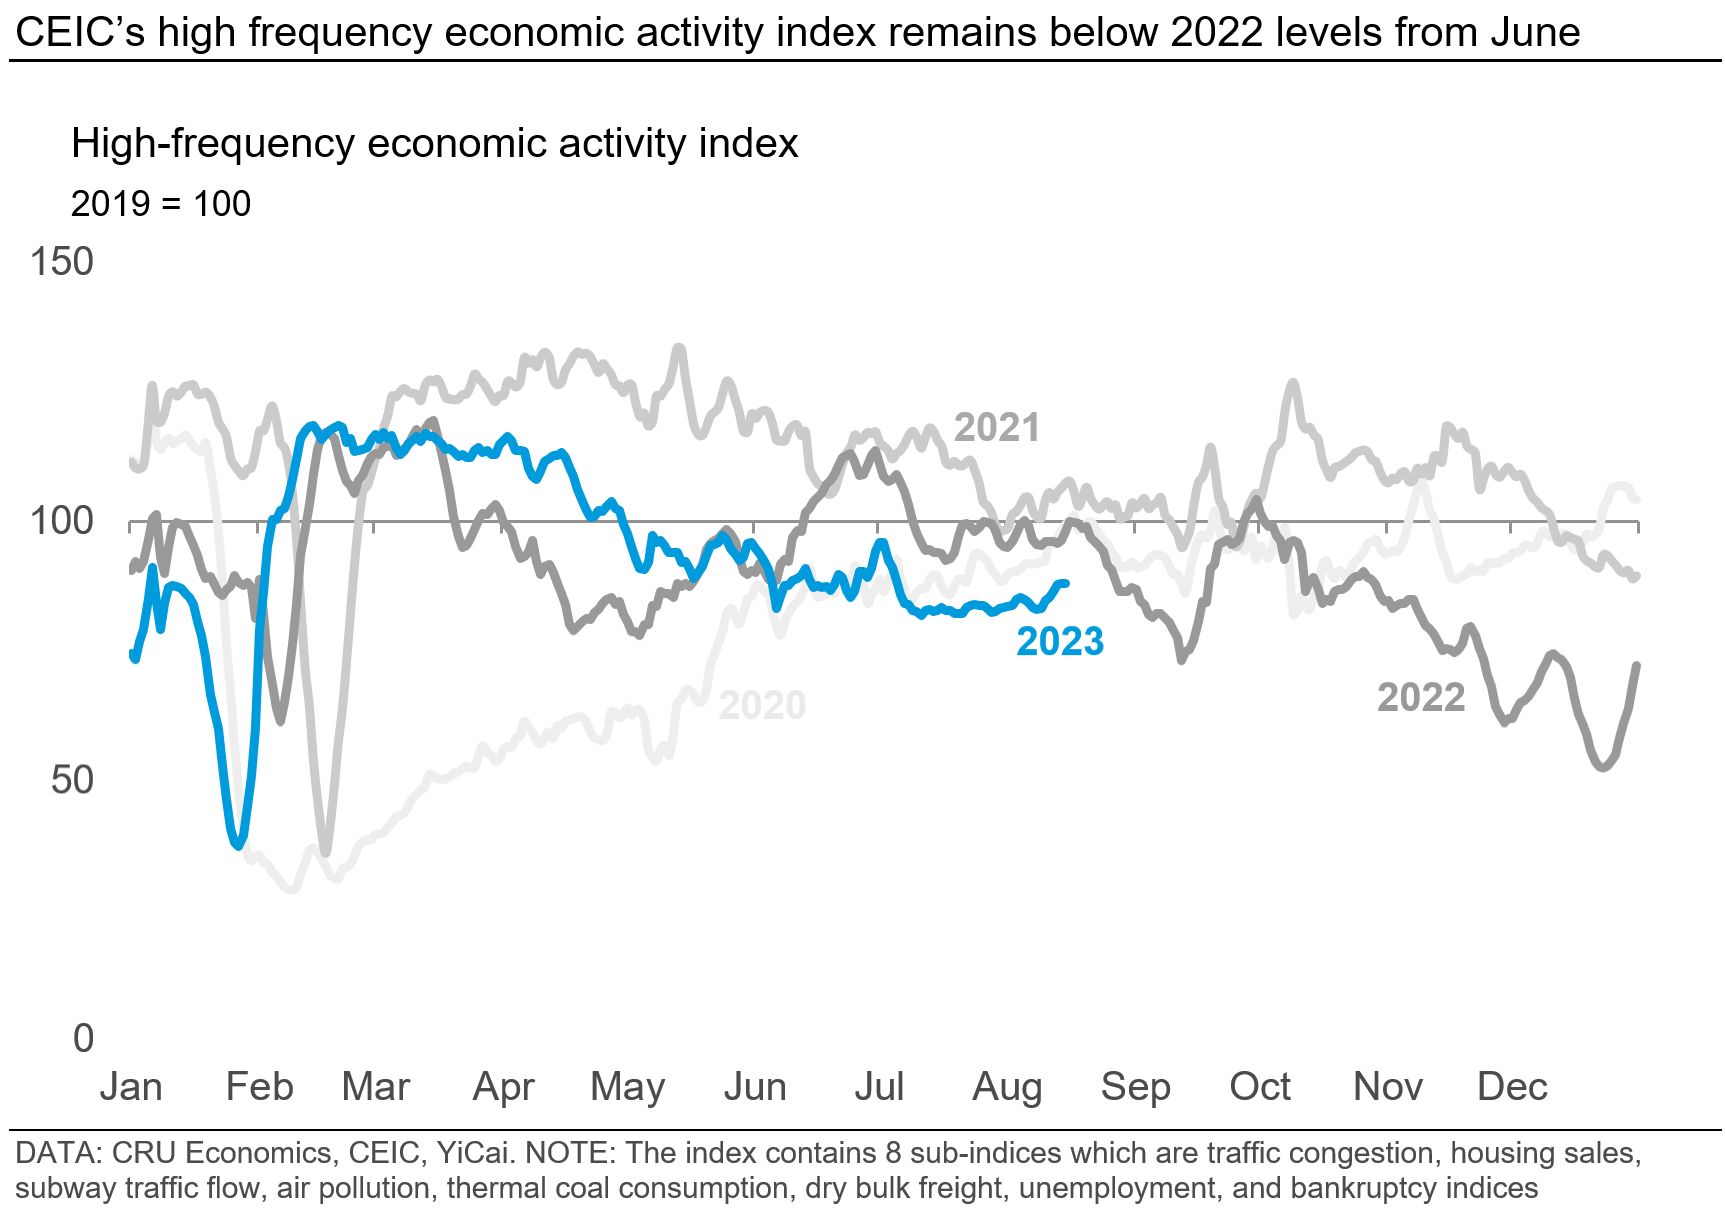 Graph showing that CEIC’s high frequency economic activity index remains below 2022 levels from June